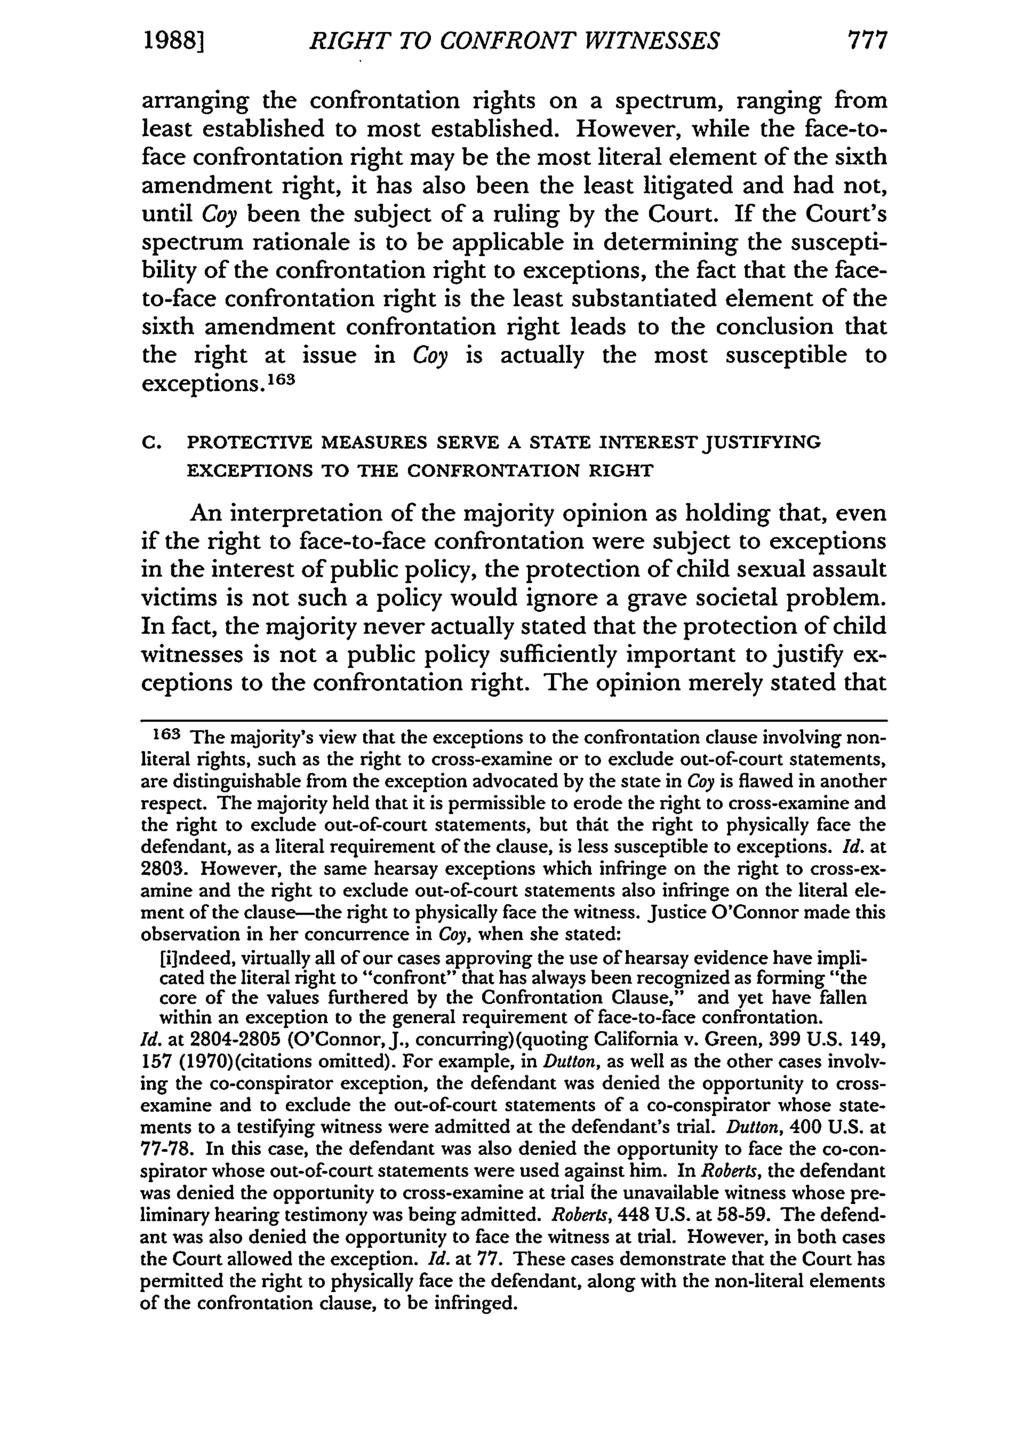 1988] RIGHT TO CONFRONT WITNESSES arranging the confrontation rights on a spectrum, ranging from least established to most established.